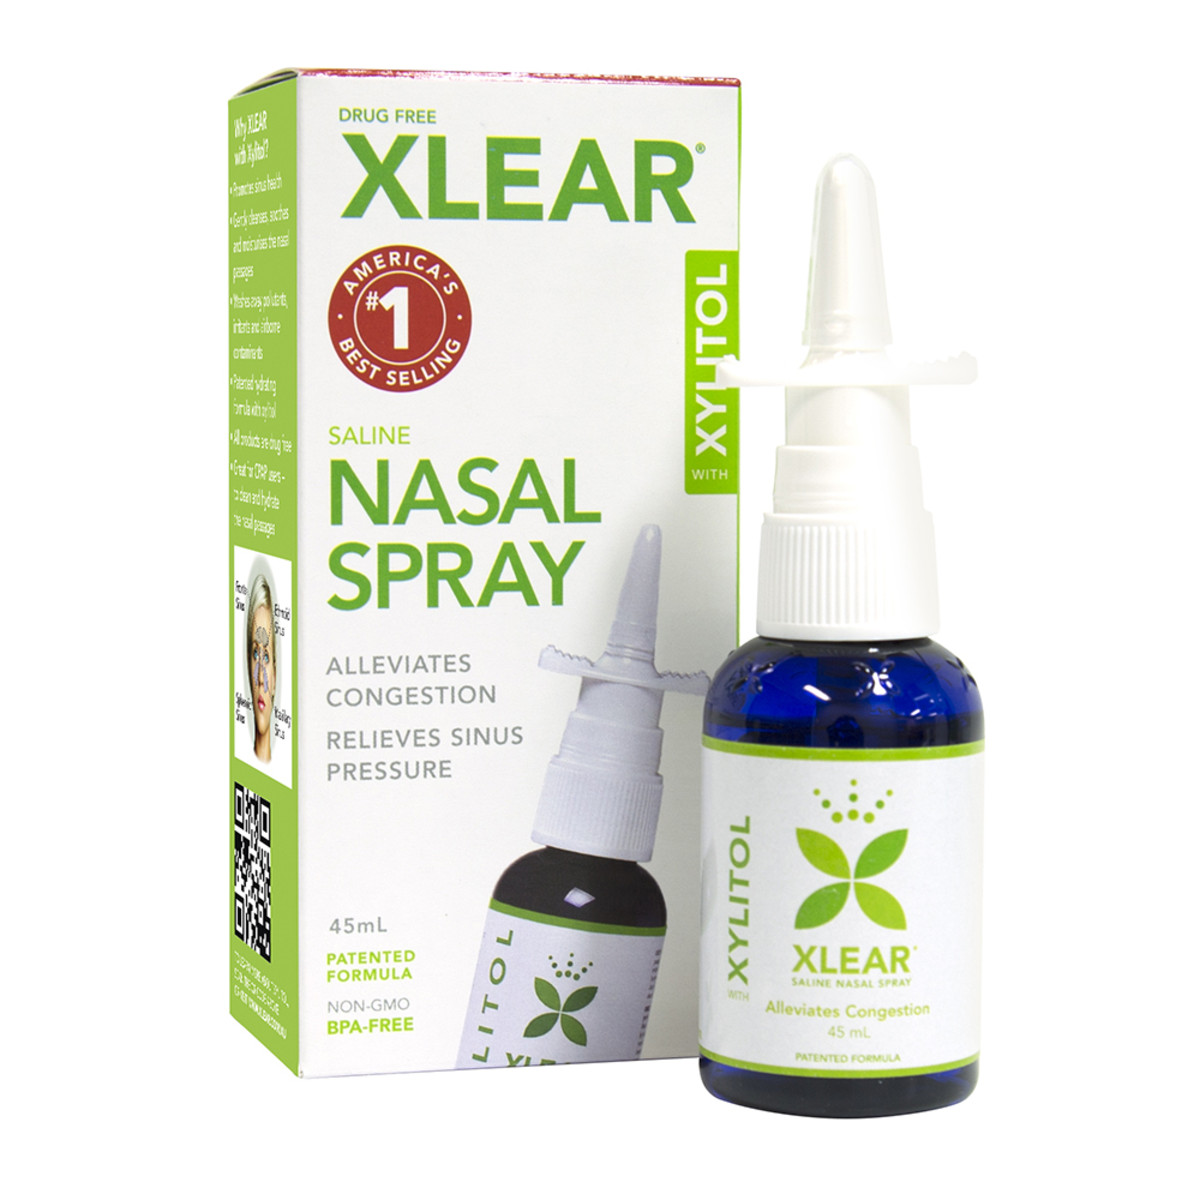 XLEAR - Nasal Sinus Care with Xylitol 45ml